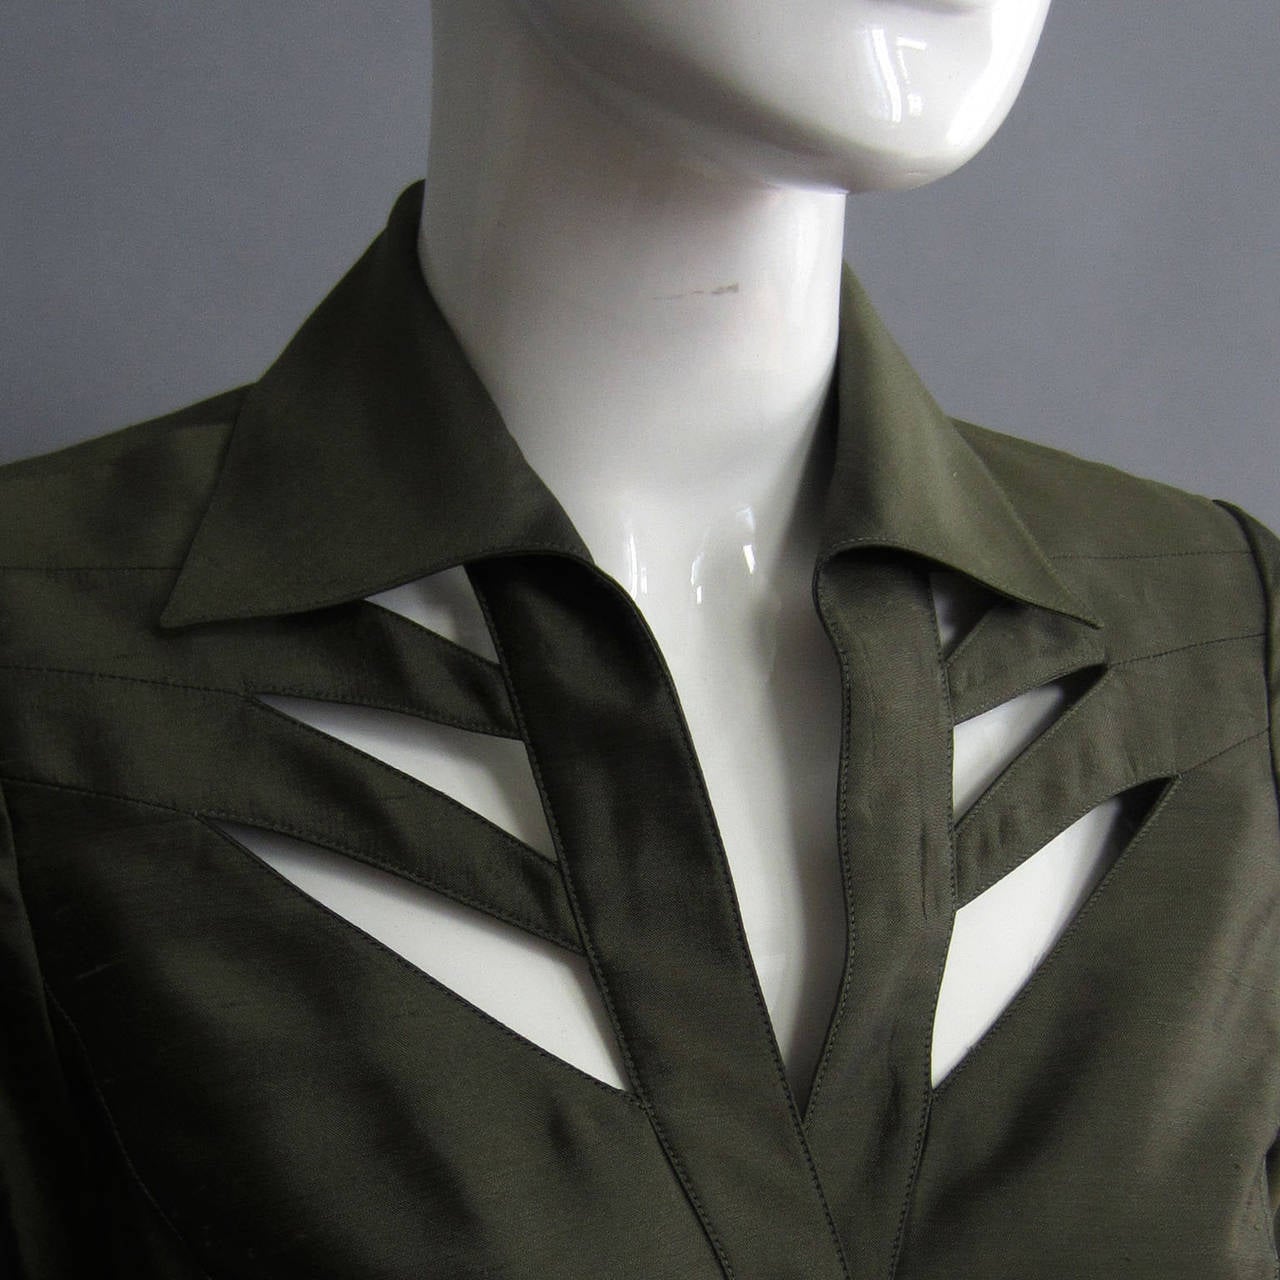 The silk fabric gives the rich, army green color a beautiful sheen. The dress is fitted with snap closures up the front center. The collar detail is accented by a series of cutouts on either side. The cutout also highlight the neckline and overall